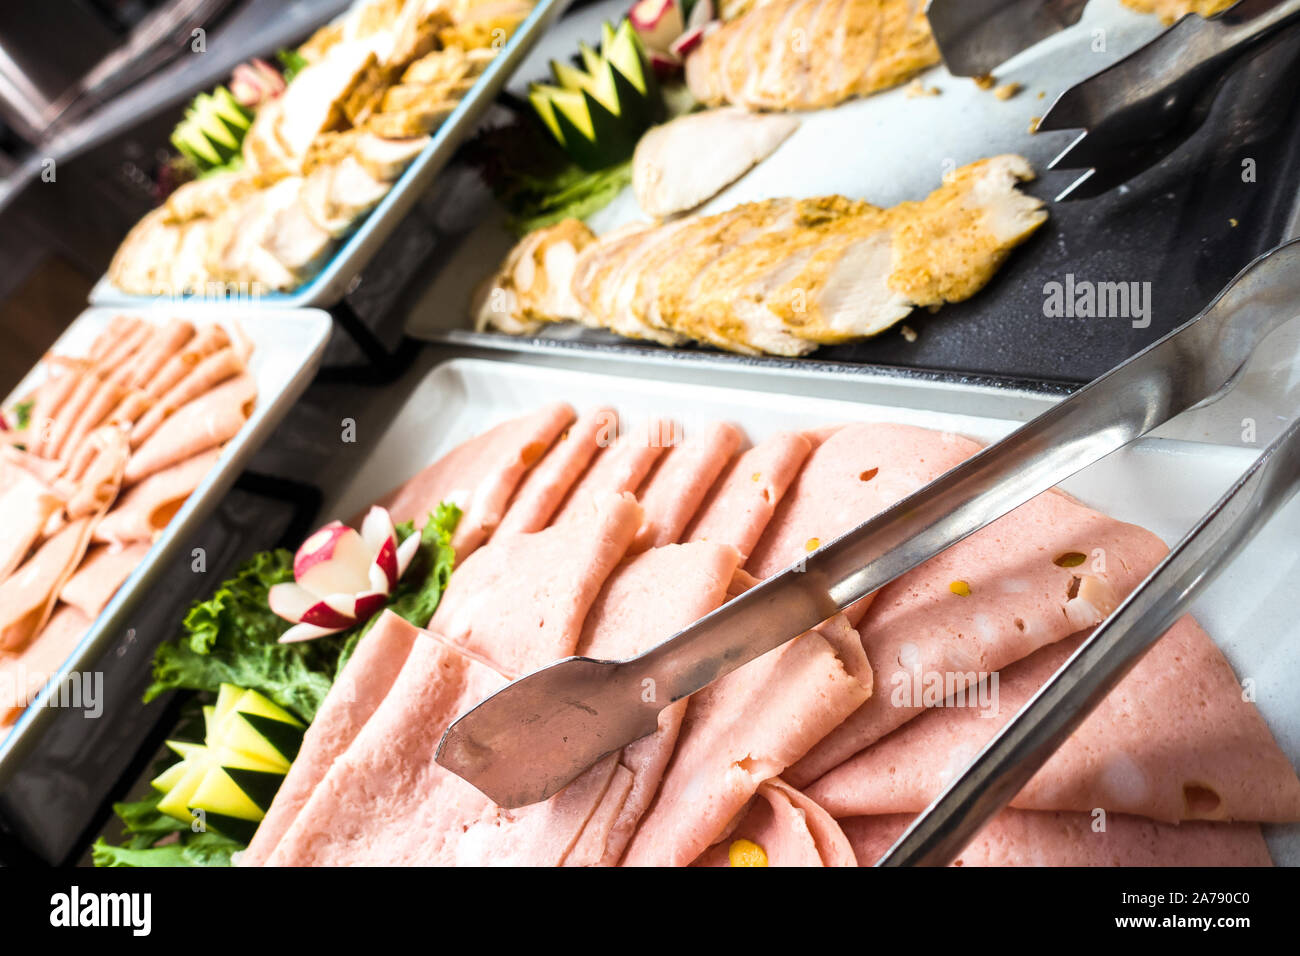 Cold salad meats for Lunch on board Queen Mary 2 Stock Photo